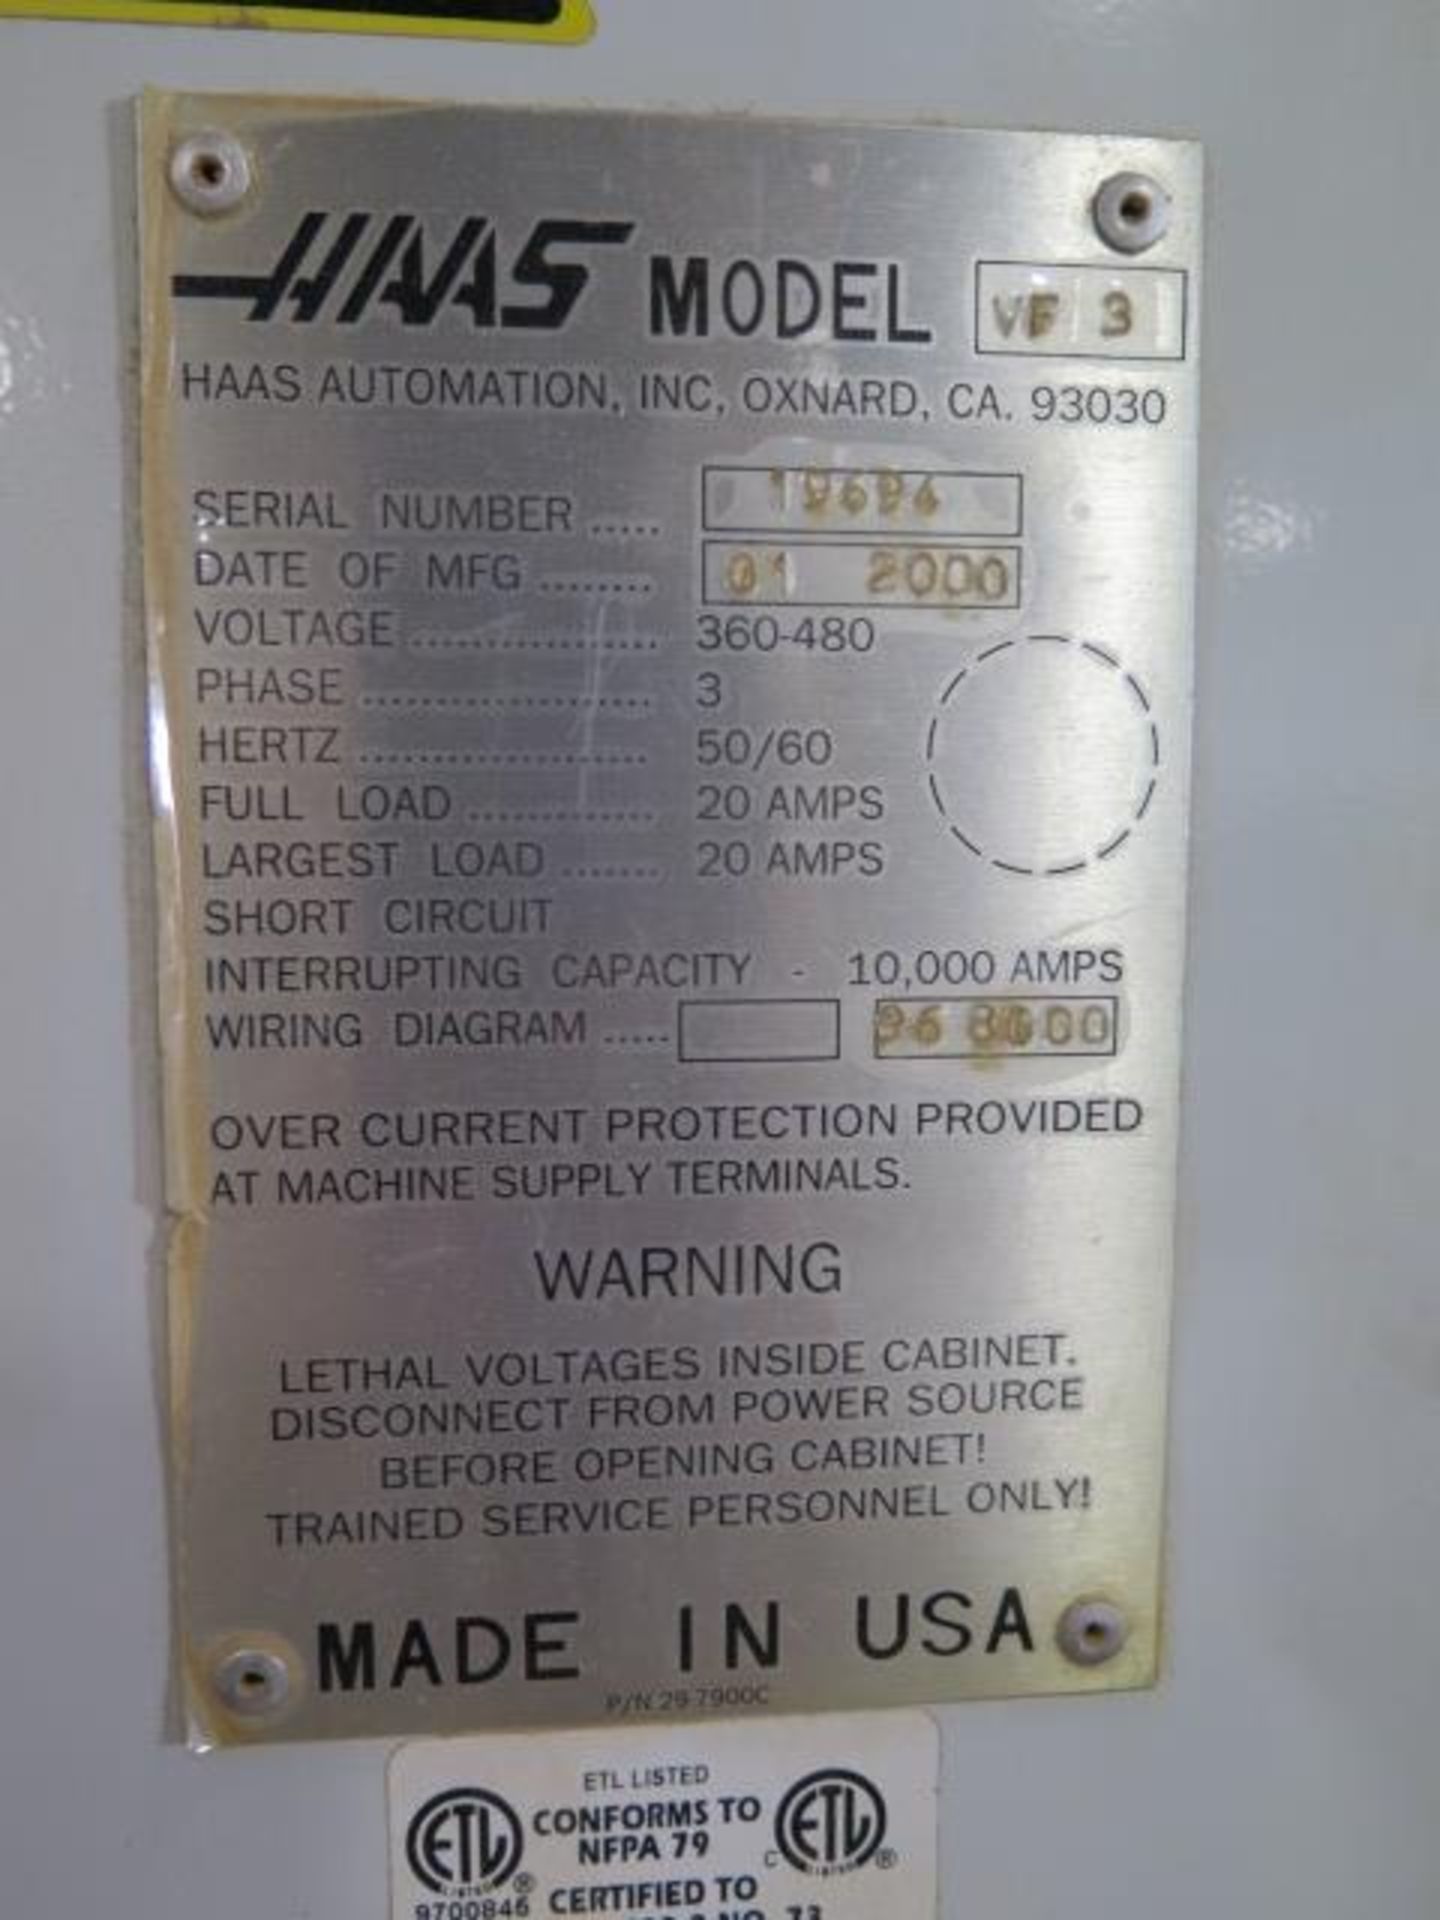 2000 Haas VF-3 CNC VMC s/n 19694 w/ Haas Controls, 20-Station ATC,CAT-40, NO COOLER TANK, SOLD AS IS - Image 15 of 17